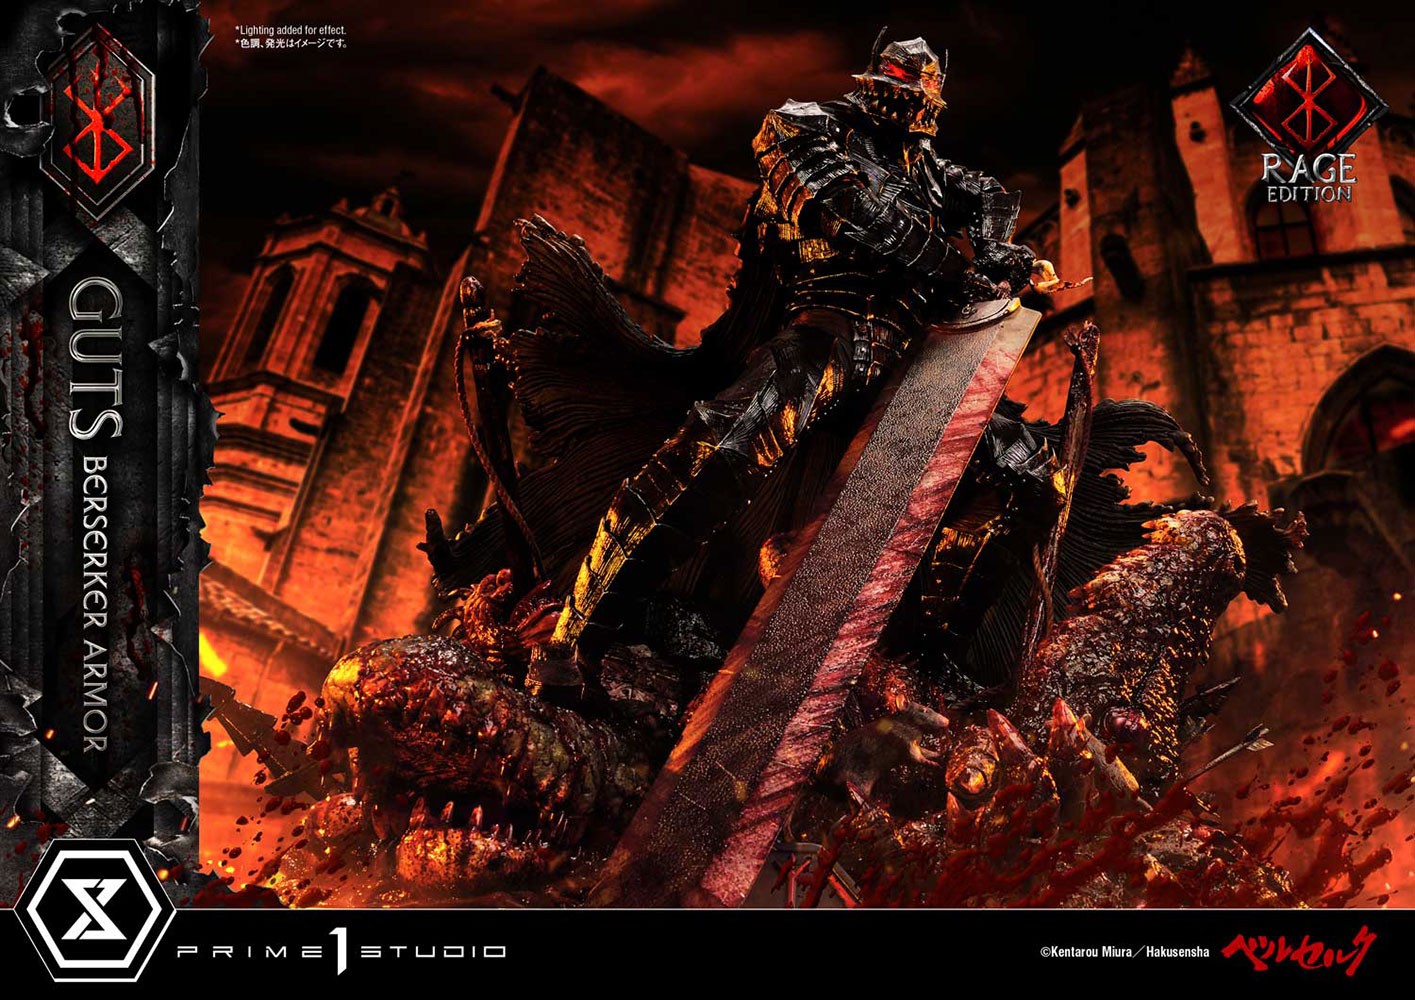 Guts Berserker Armor (Rage Edition) Collector Edition (Prototype Shown) View 39